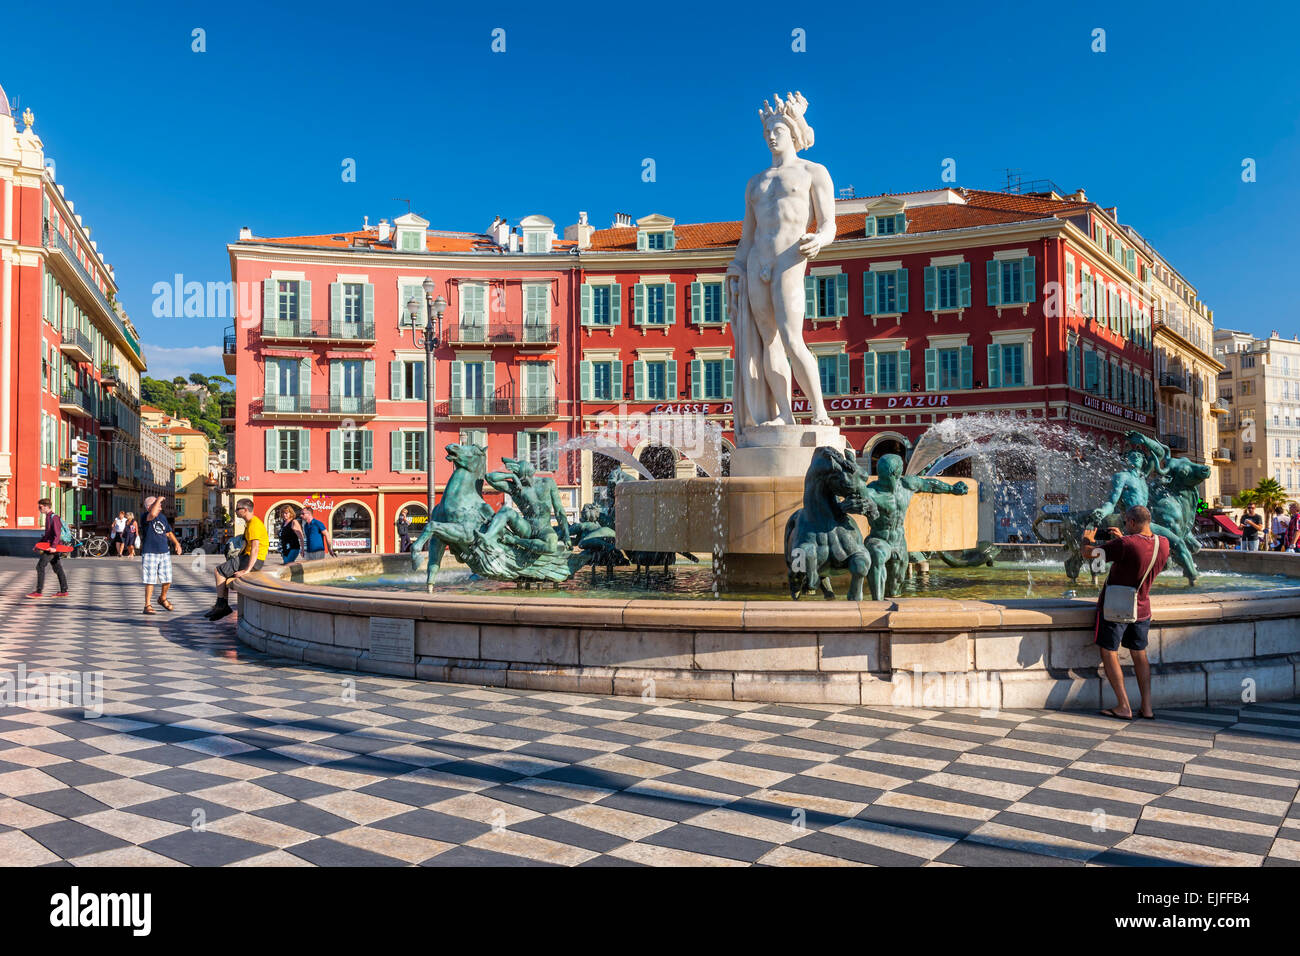 NICE, FRANCE - OCTOBER 2, 2014: Fountain of the sun or Fontaine du Soleil with statue of Apollo at Place Massena Stock Photo